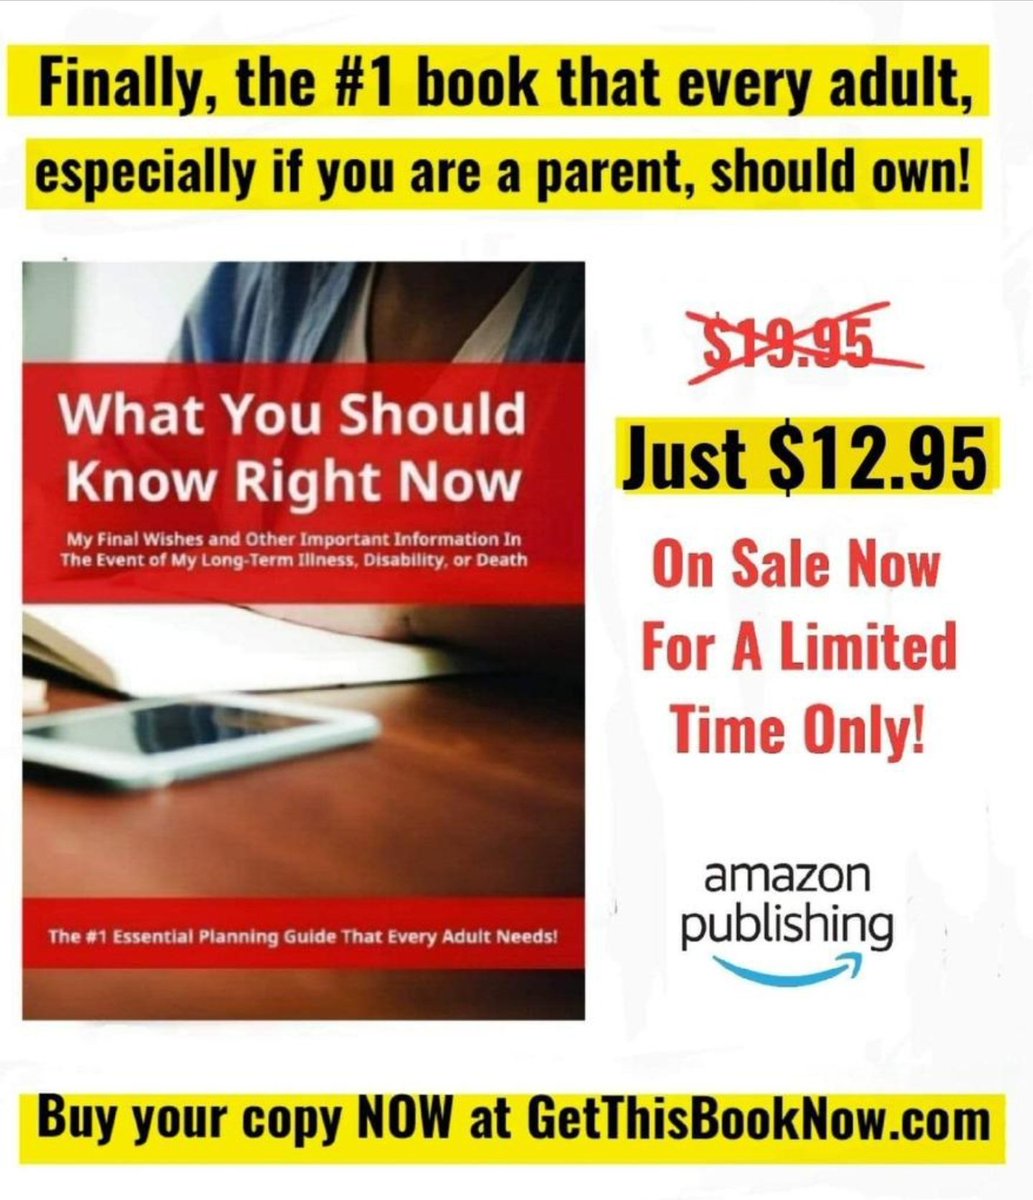 @thepennyhoarder Another reason to own this book! It's the #1 book that every adult should own right now, especially if you are a parent! Find out why now at GetThisBookNow.com! 📕👀 #BePrepared #TheView ❤️